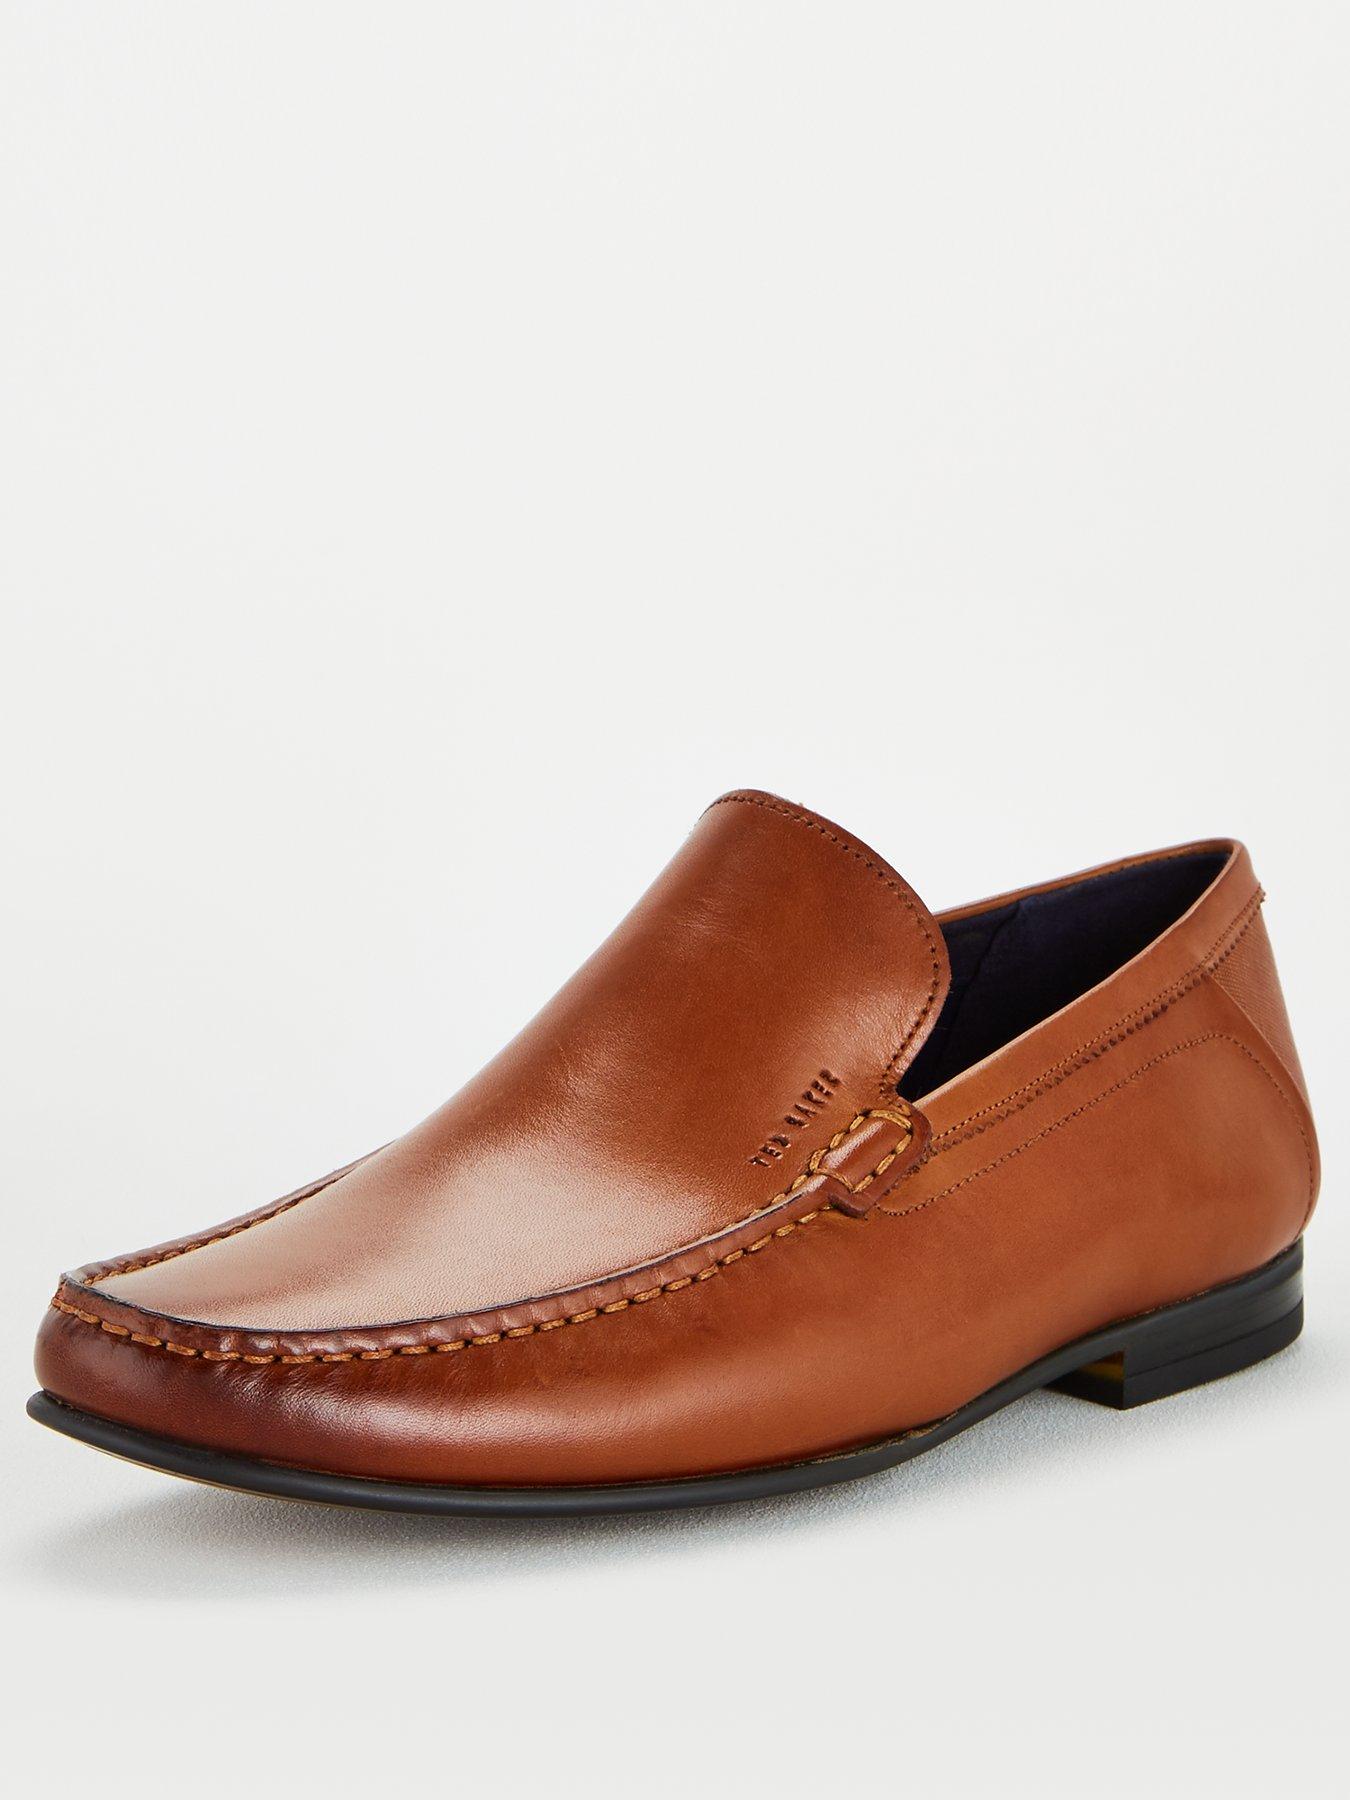  Lassty Leather Loafers - Tan